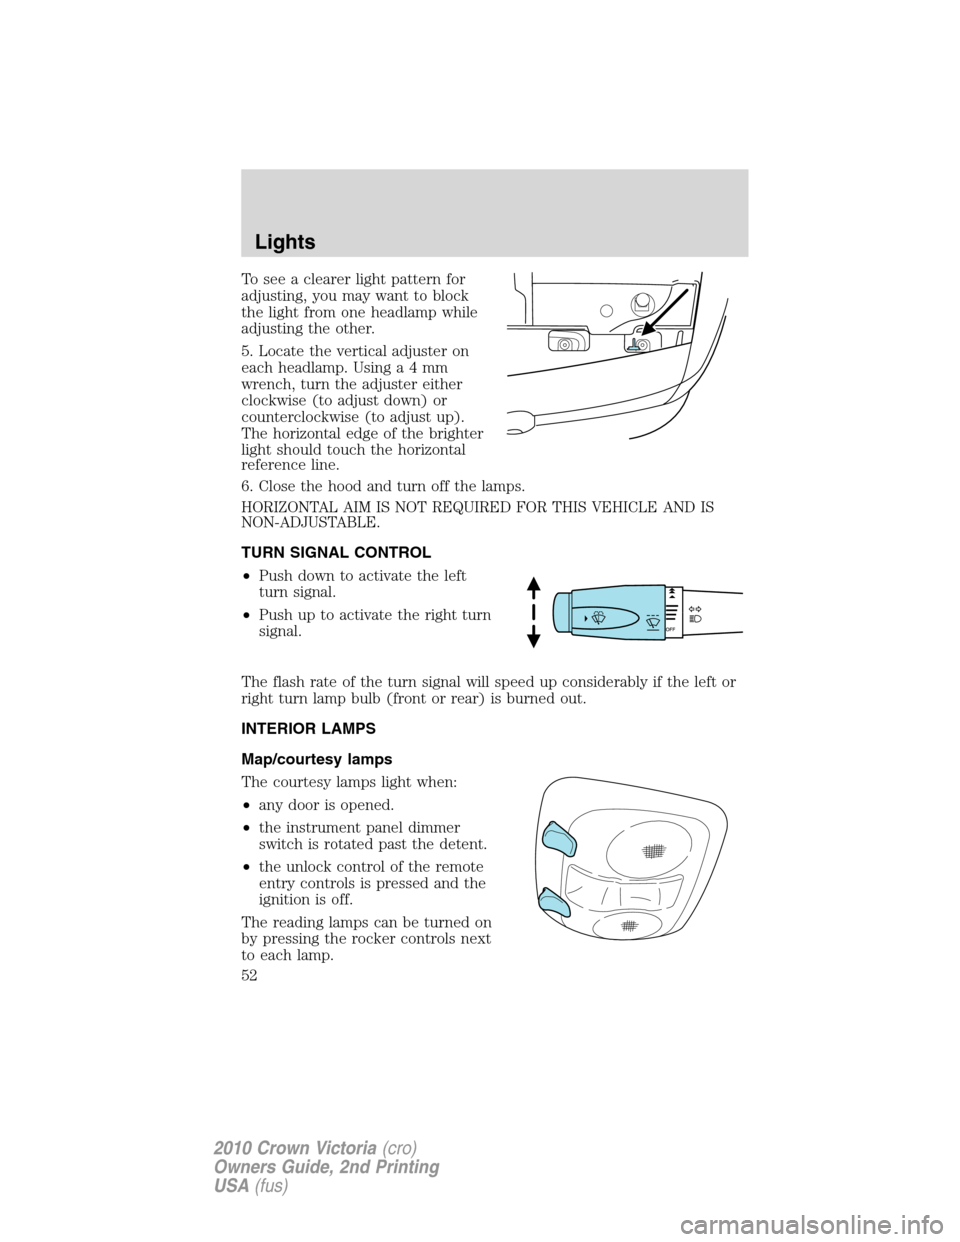 FORD CROWN VICTORIA 2010 2.G Owners Manual To see a clearer light pattern for
adjusting, you may want to block
the light from one headlamp while
adjusting the other.
5. Locate the vertical adjuster on
each headlamp. Usinga4mm
wrench, turn the 